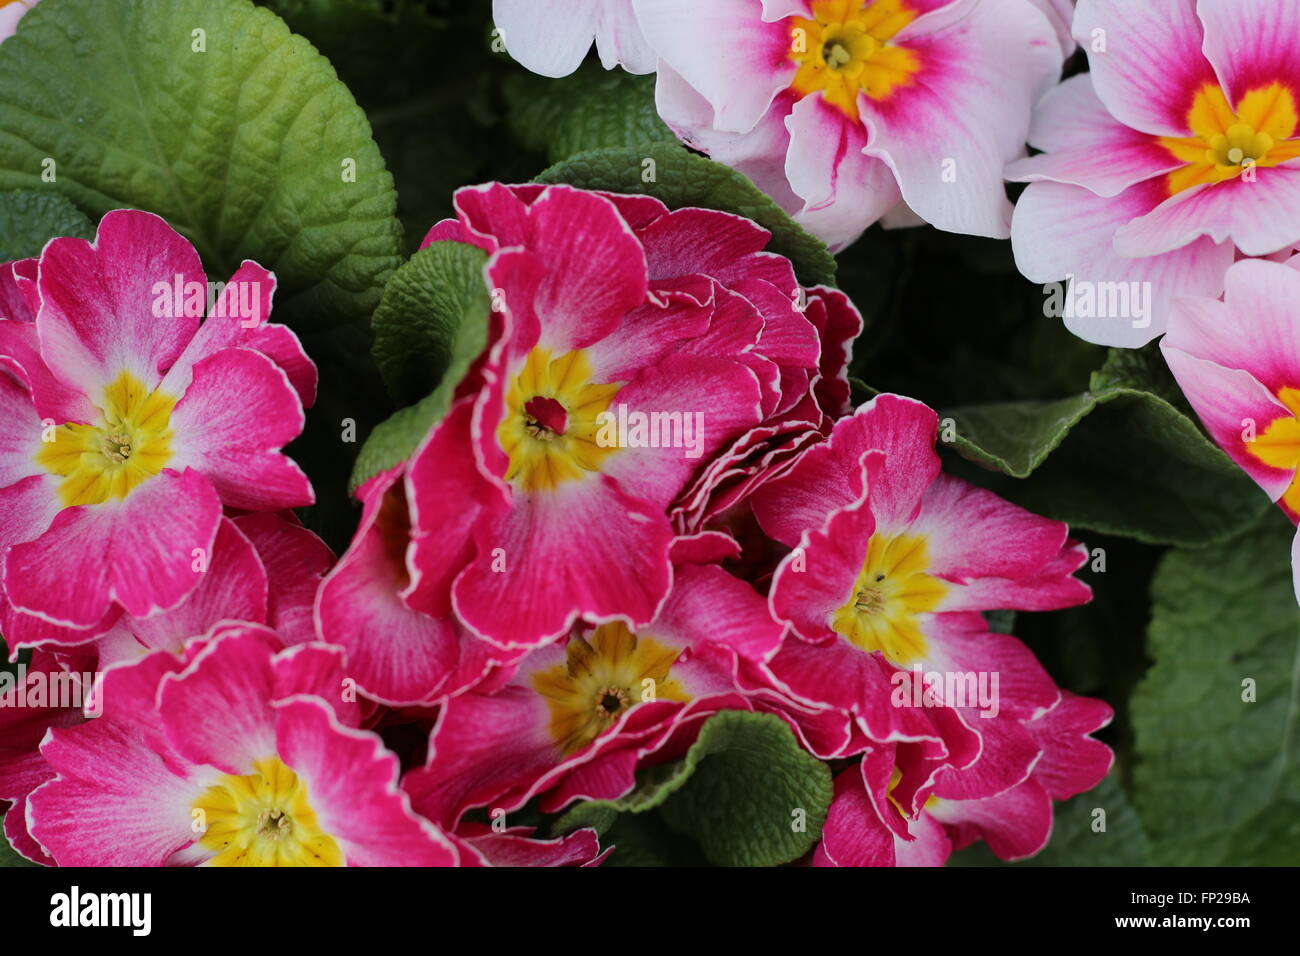 primroses in a flower pot Stock Photo